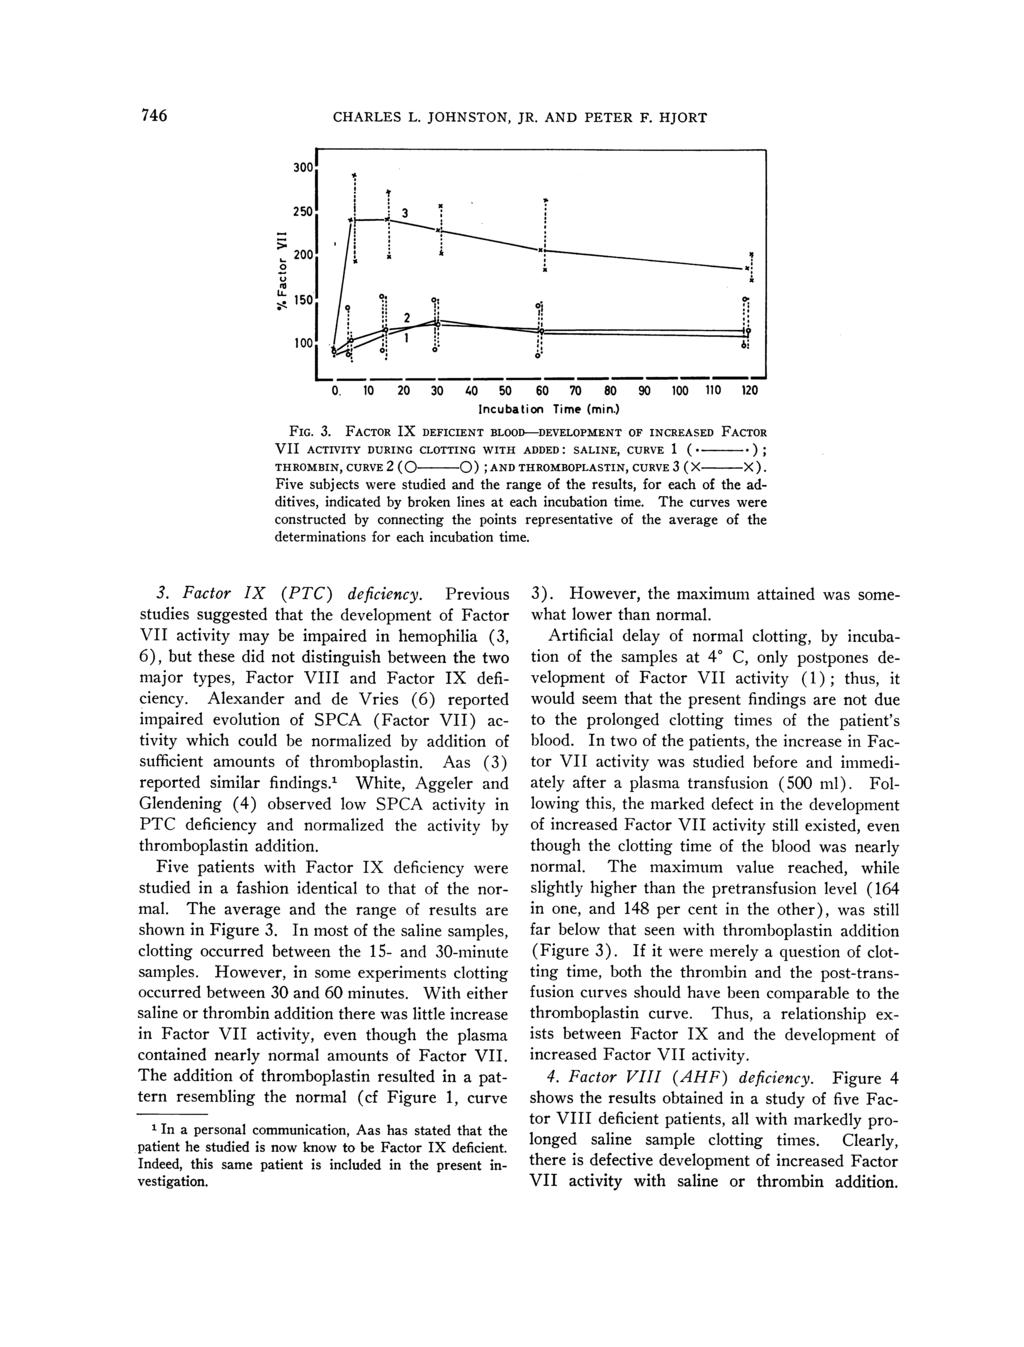 746 CHARLES L. JOHNSTON, JR. AND PETER F. HJORT 3001 250 I 3 0. 10 60 70 80 90 100 110 120 FIG. 3. FACTOR IX DEFICIENT BLOOD-EVELOPMENT OF INCREASED FACTOR VII ACTIVITY DURING CLOTTING WITH ADDED: SALINE, CURVE 1 (.